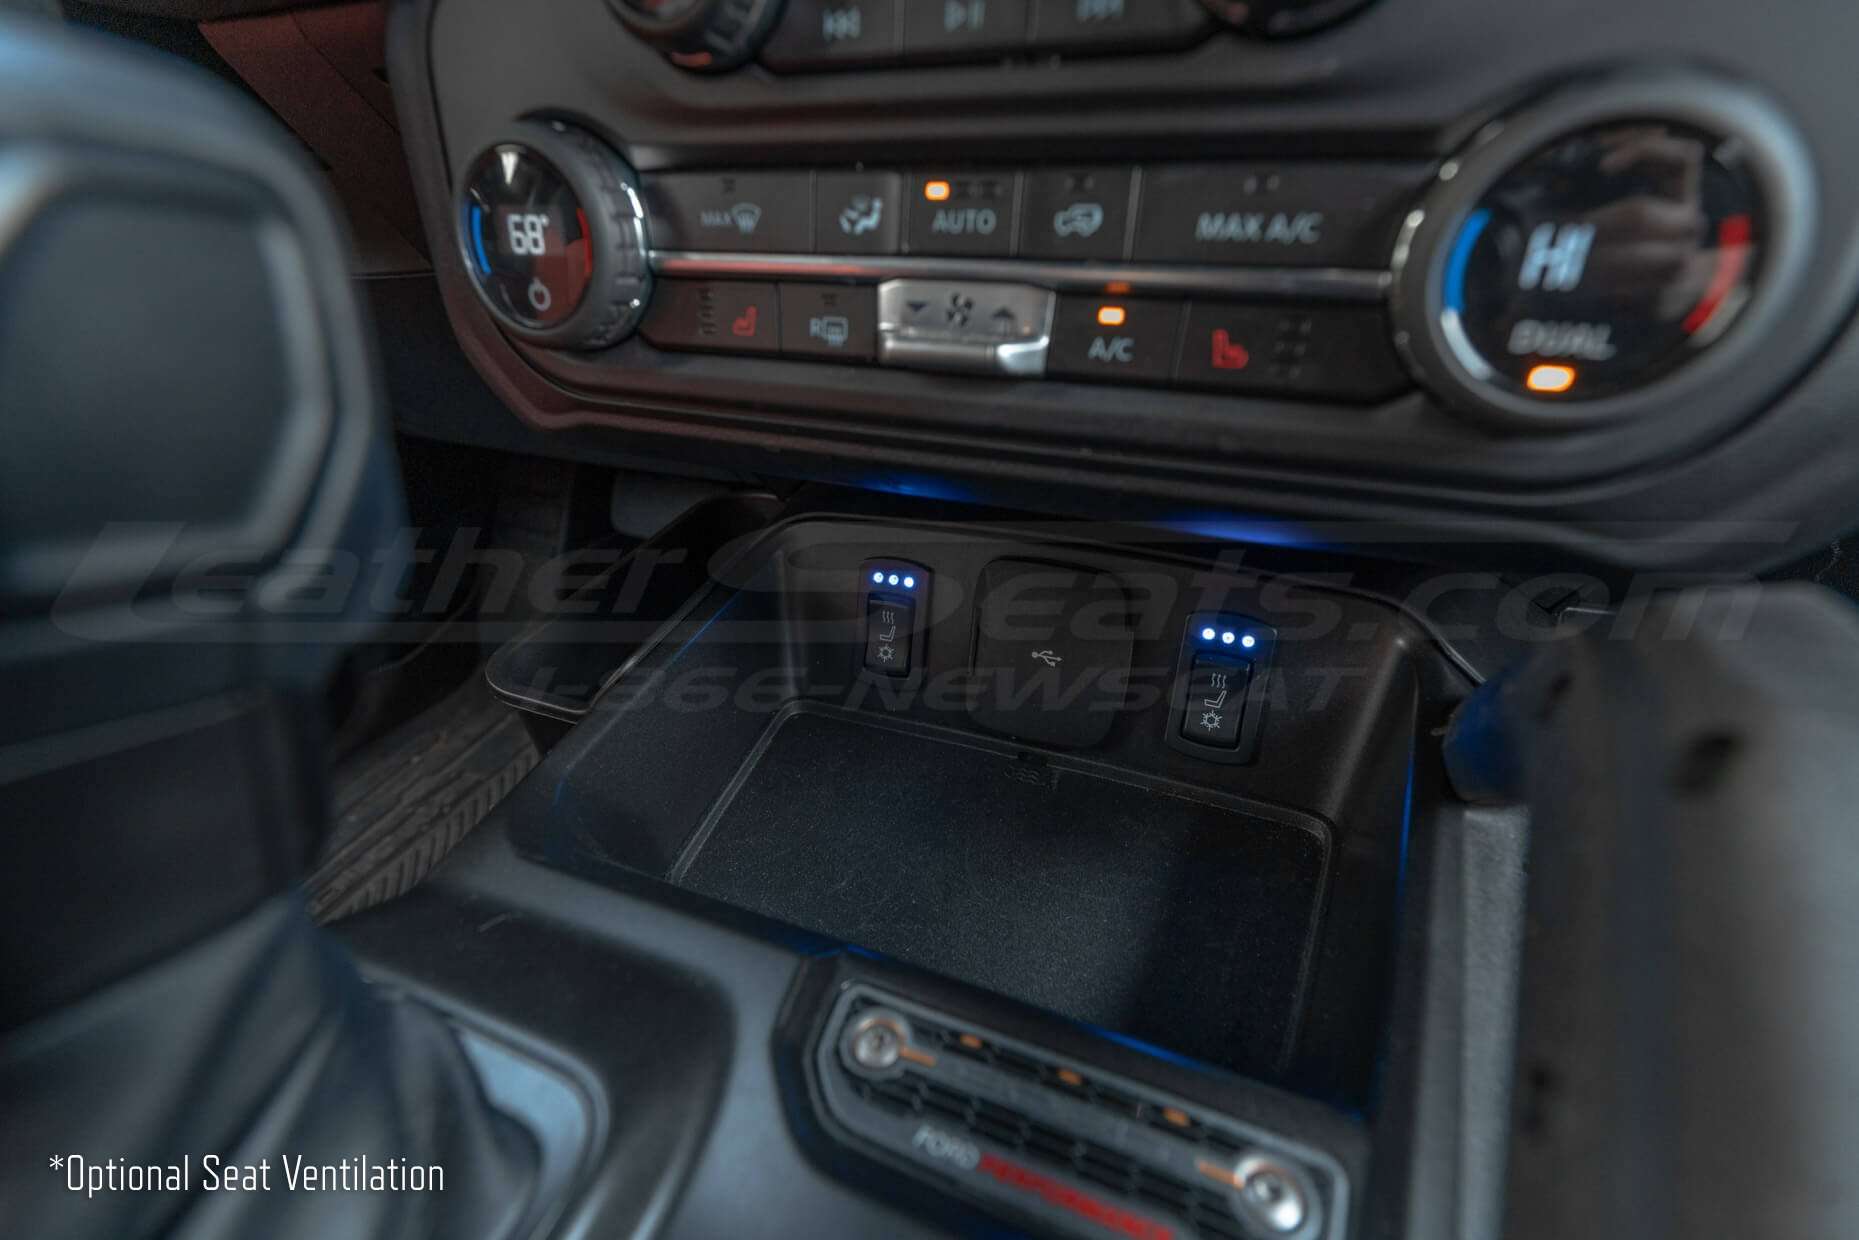 Optional Seat Ventilation/Cooling for Ford raptor Bronco - Cooling Section shown